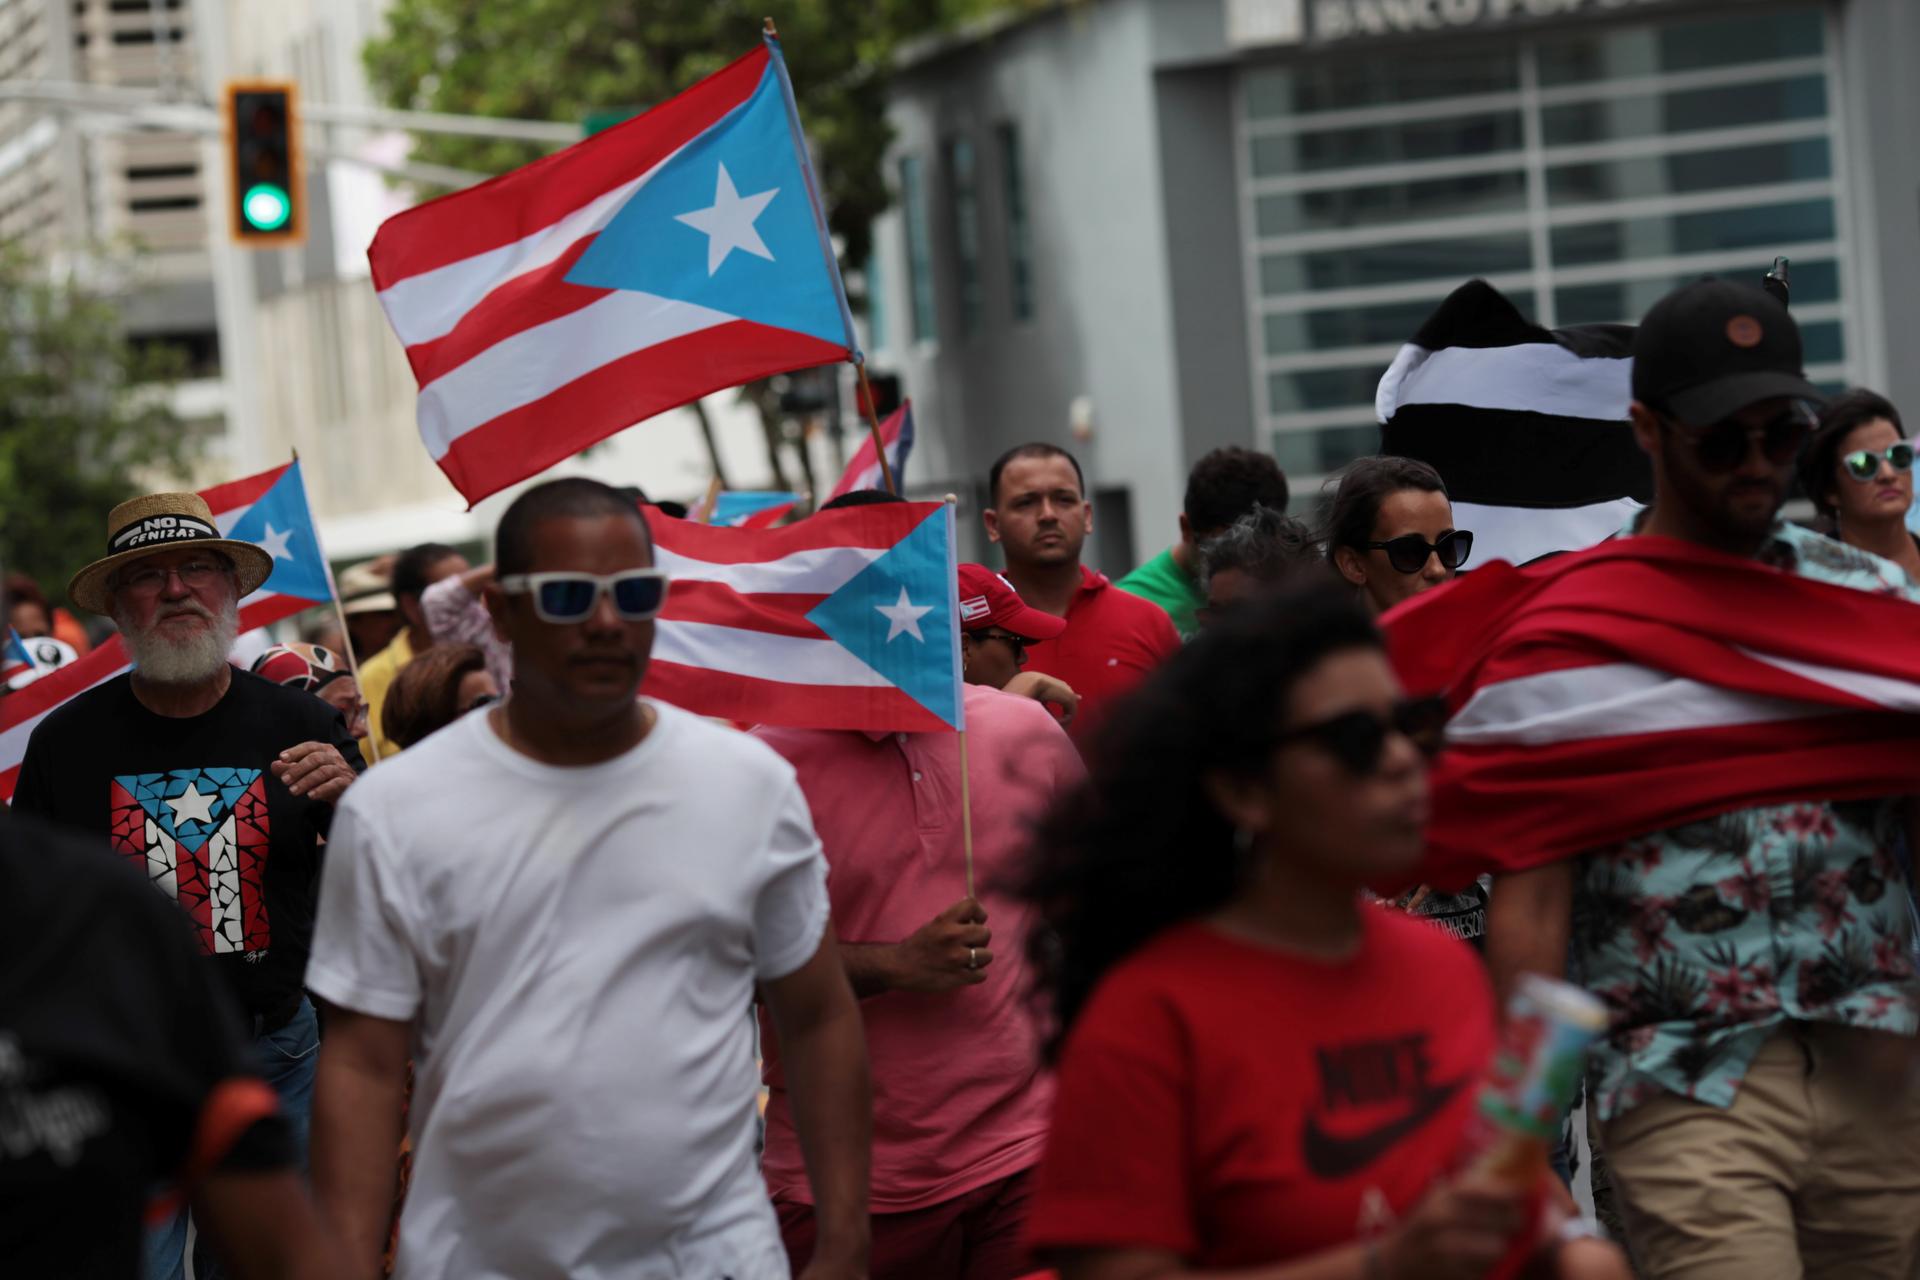 People march in support of Puerto Rico becoming an independent nation as the economically struggling U.S. island territory voted overwhelmingly on Sunday in favour of becoming the 51st state, in San Juan, Puerto Rico June 11, 2017.